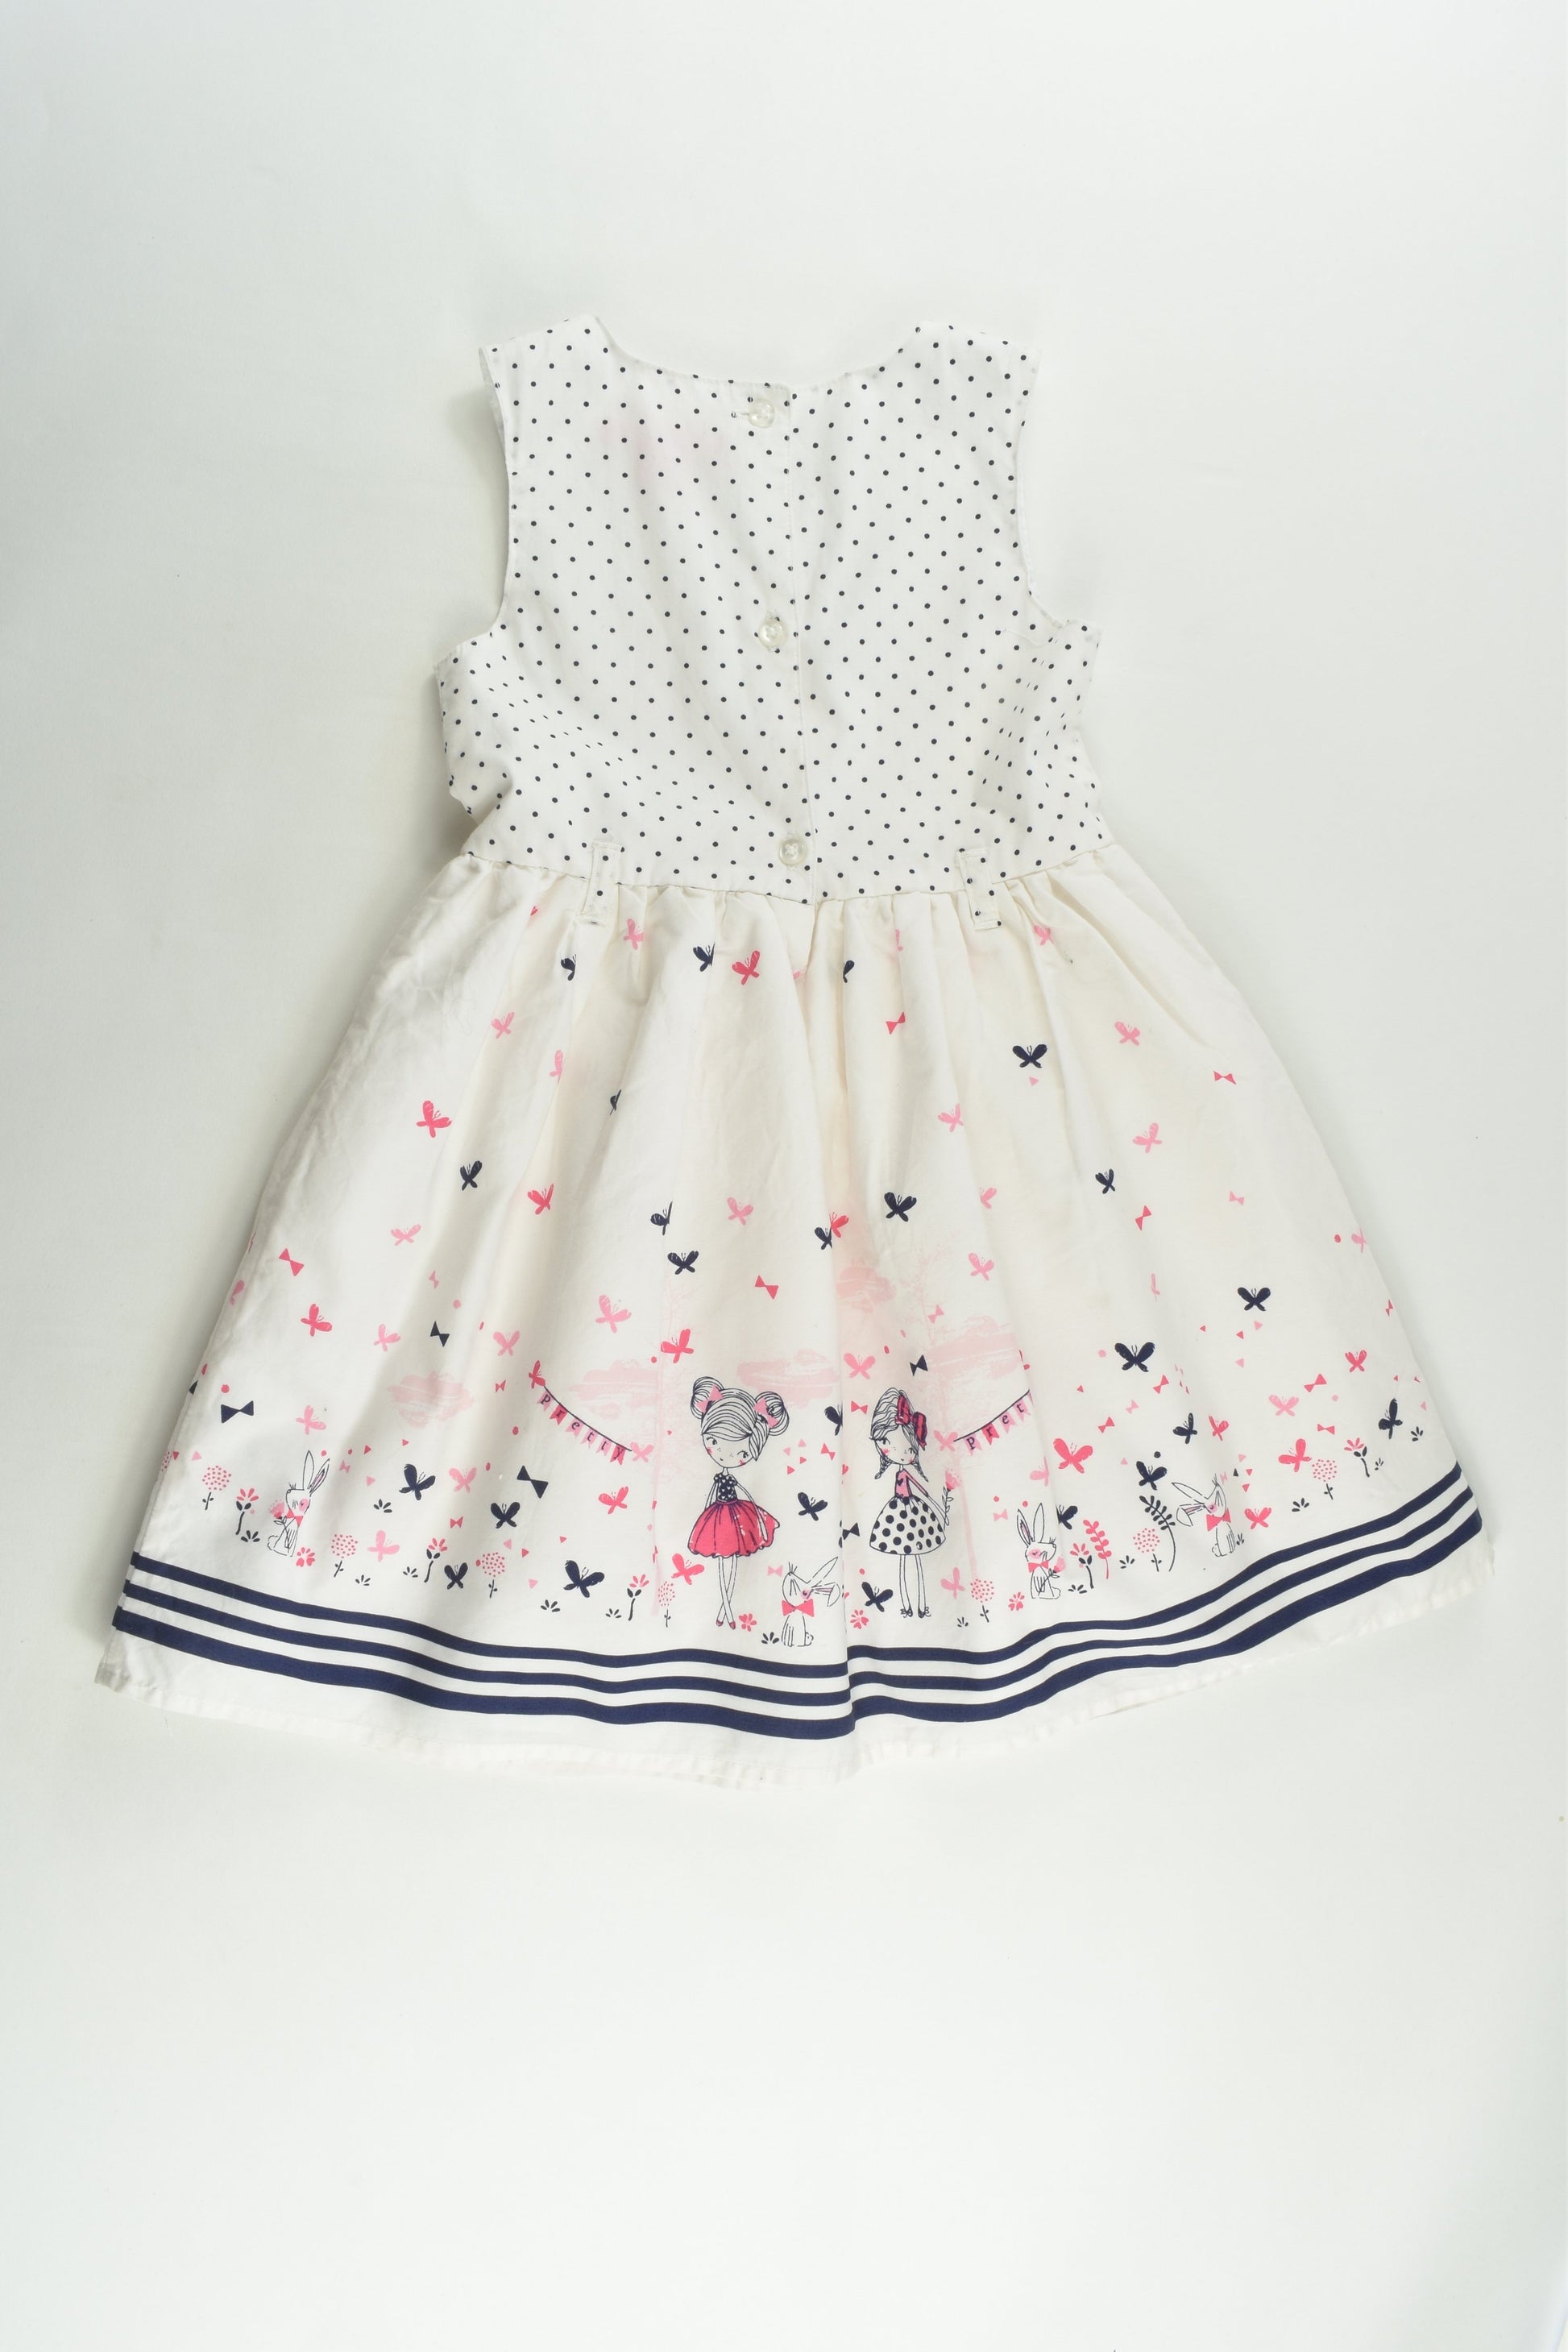 Young Dimension Size 2-3 (98 cm) Girls and Animals Lined Tulle Dress